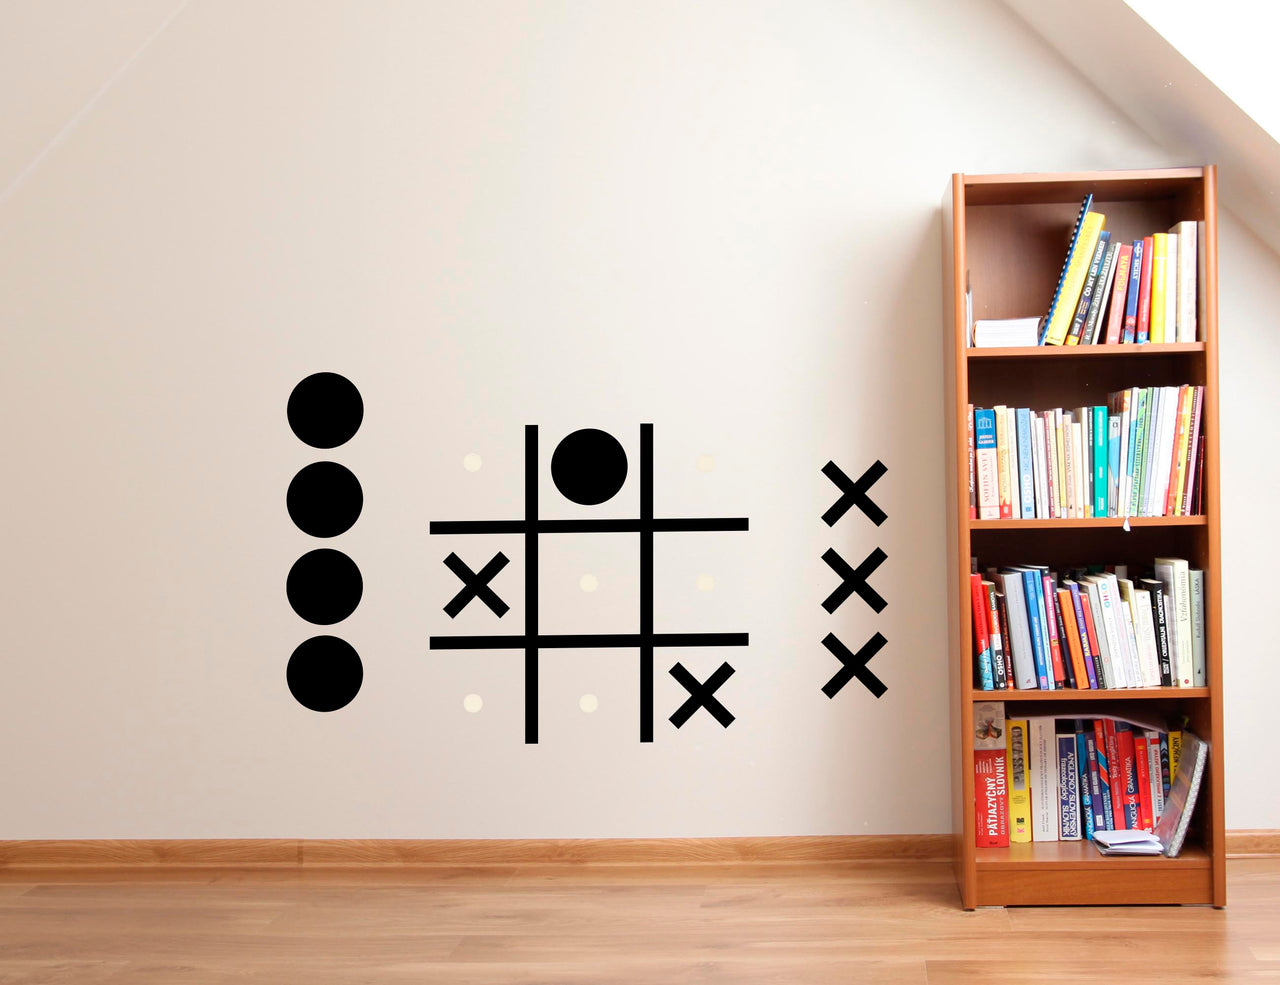 Tic-Tac-Toe Game Wall Art - Tic Tac Toe Playroom Kids Game - Games for Family Time - Noughts and Crosses Game - Board Game Baby Friendly